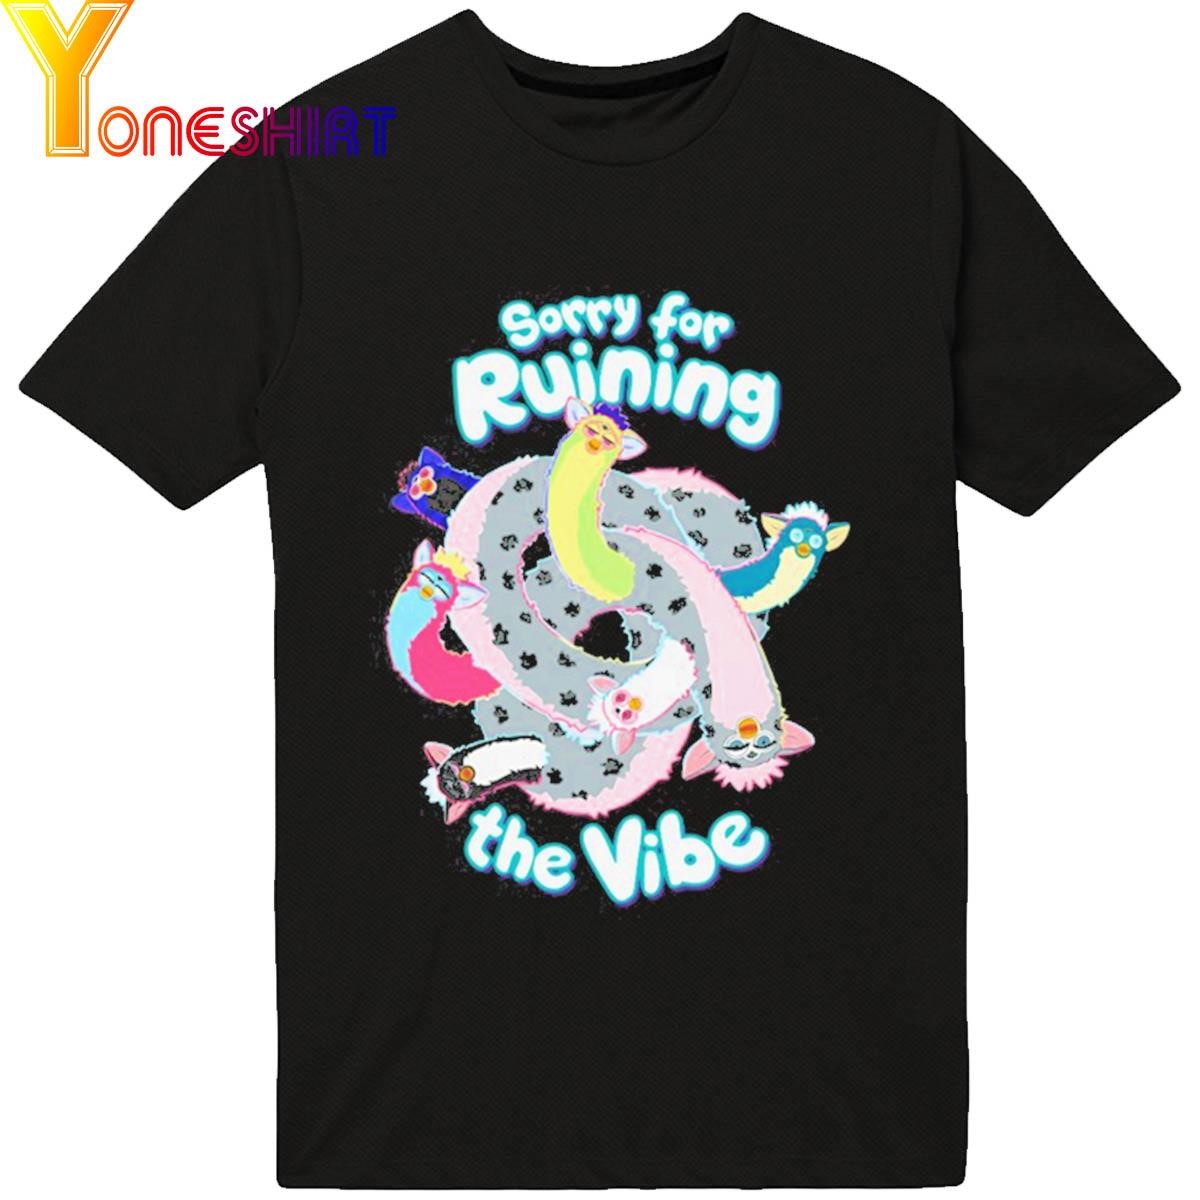 Sorry For Ruining The Vibe shirt